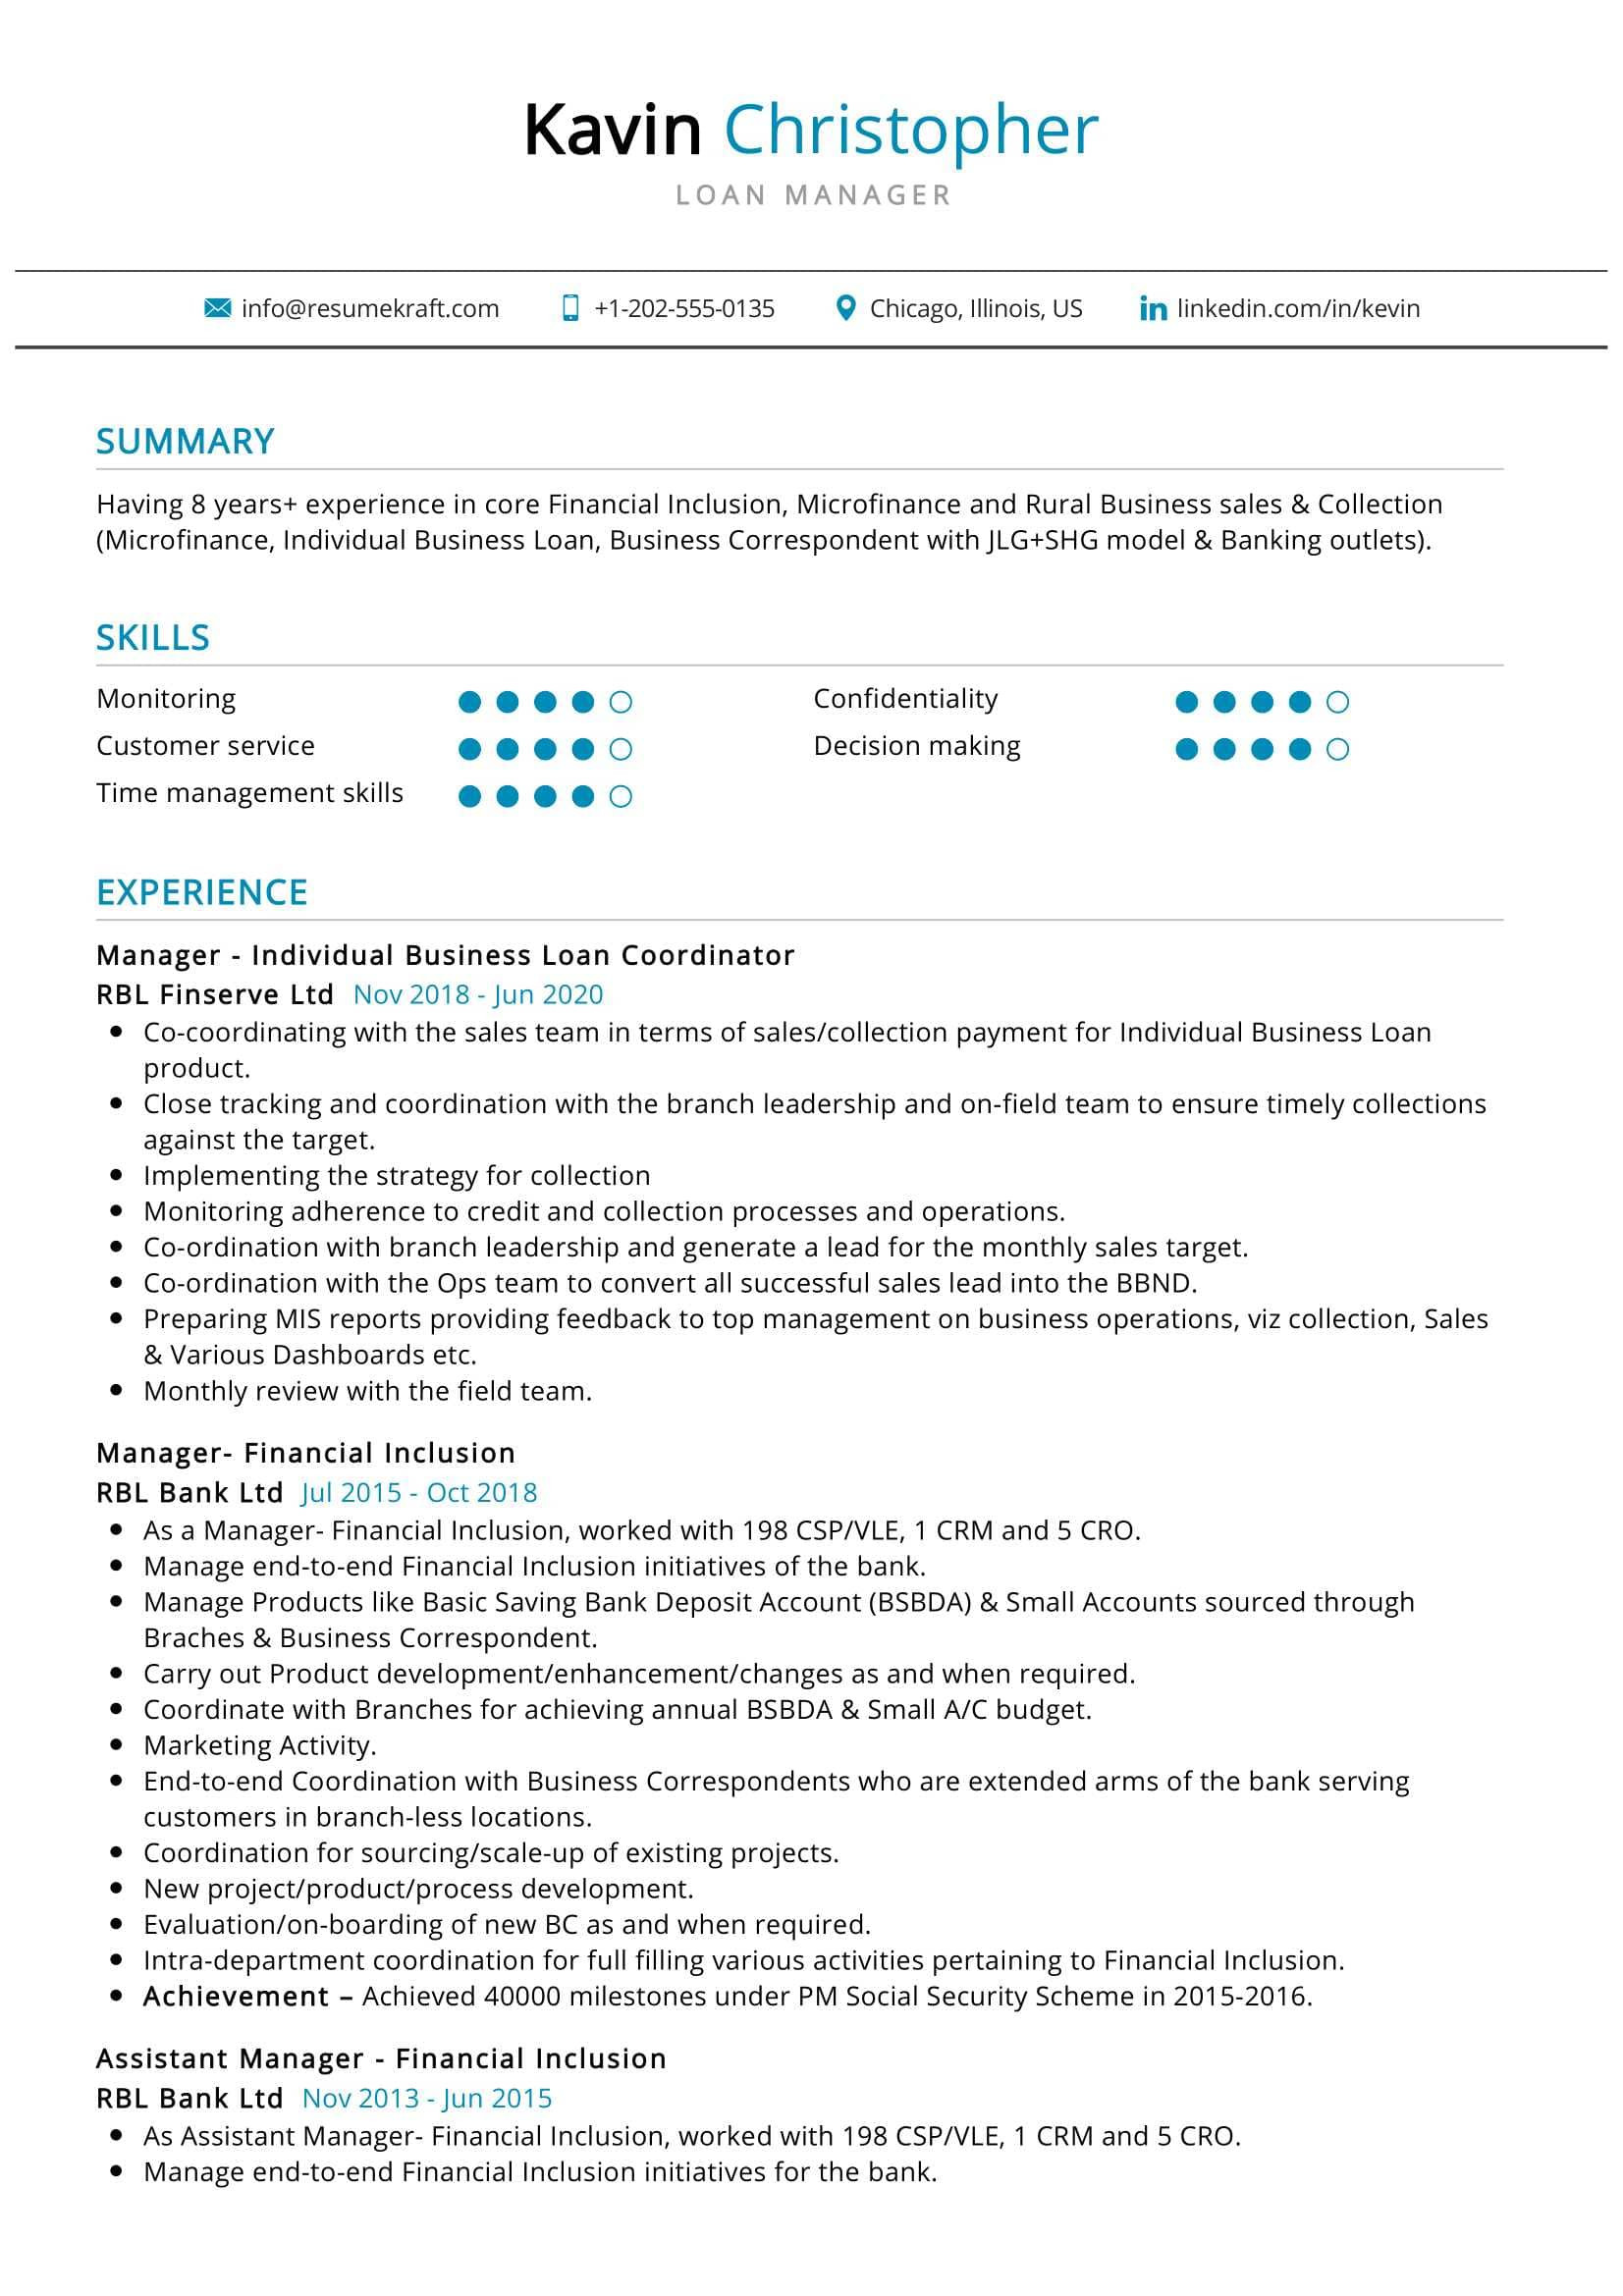 Credit and Collections Manager Resume Sample Loan Manager Resume Sample 2022 Writing Tips – Resumekraft